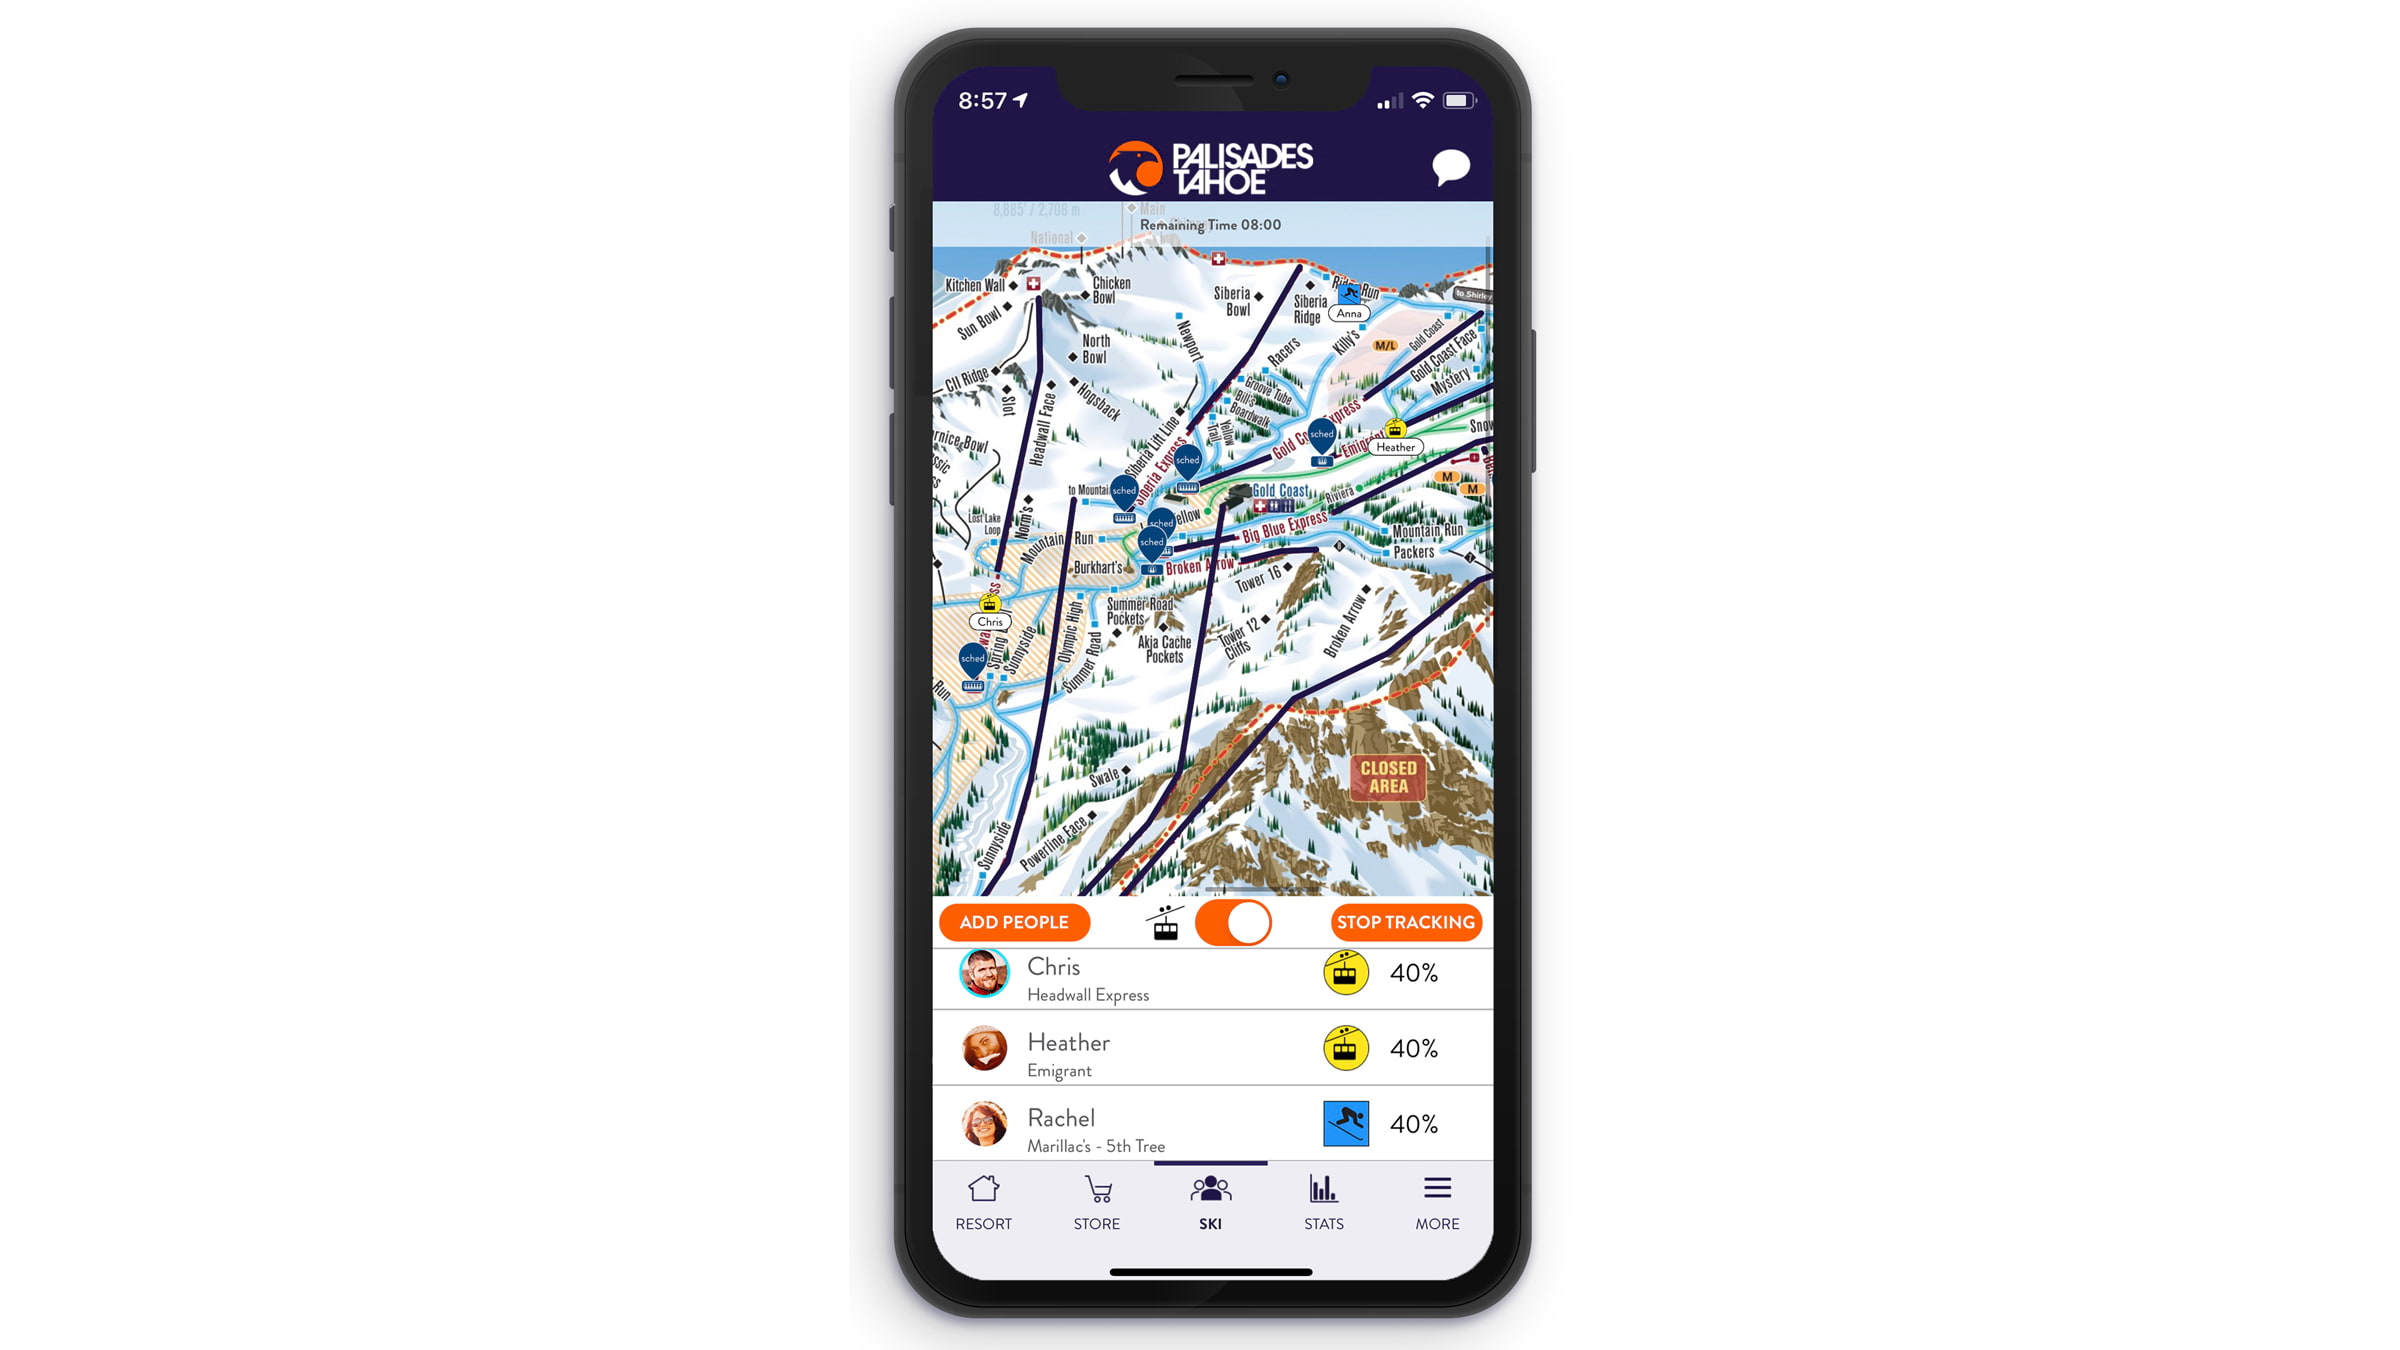 Find your friends on the ski hill function on the Palisades Tahoe mobile app